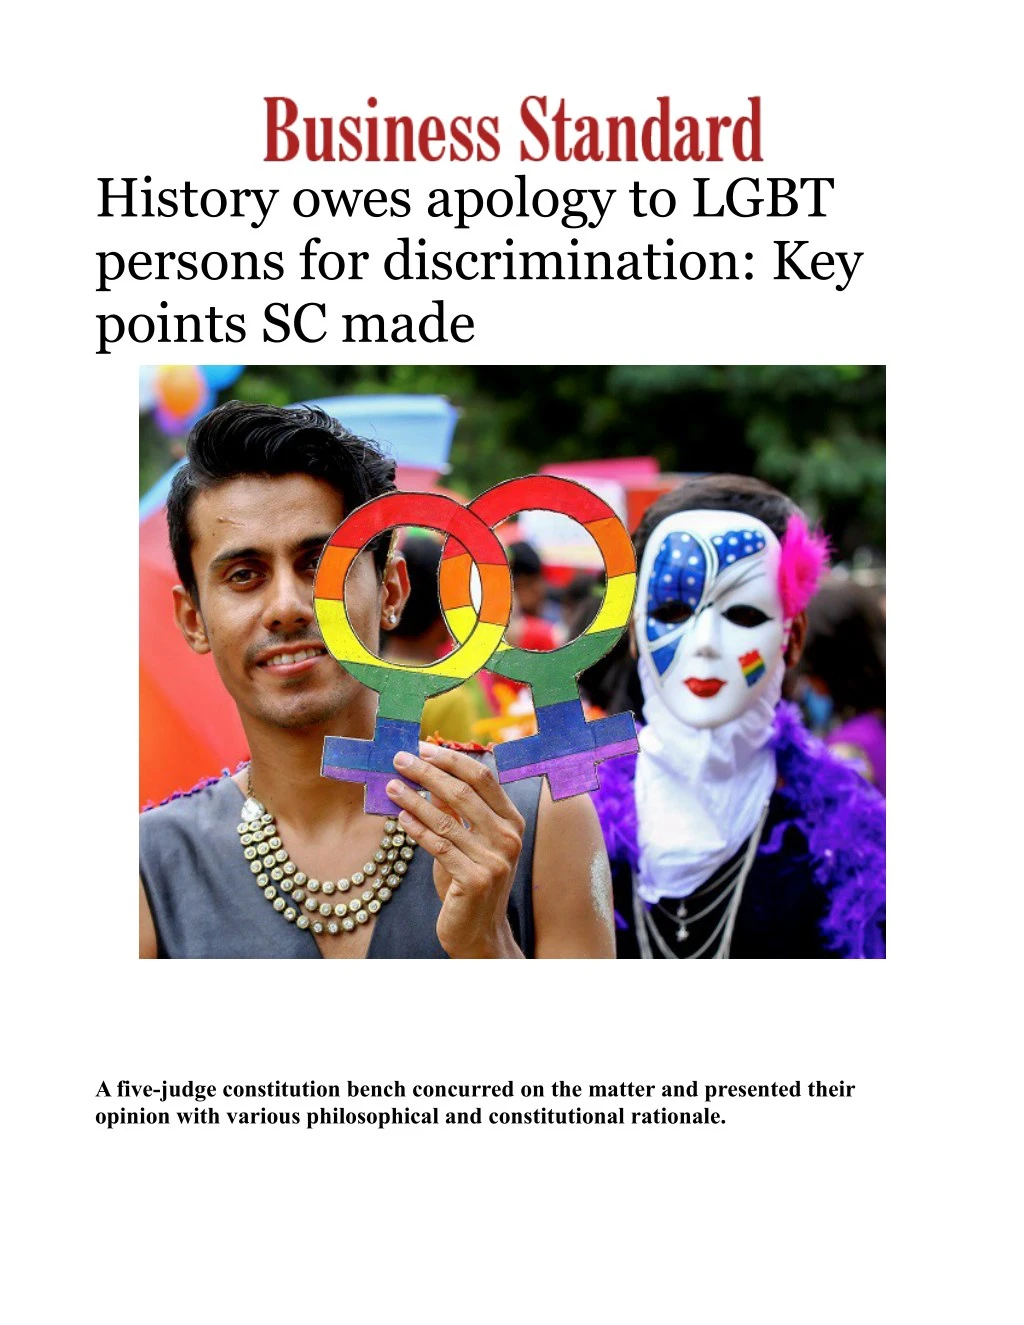 history owes apology to lgbt persons